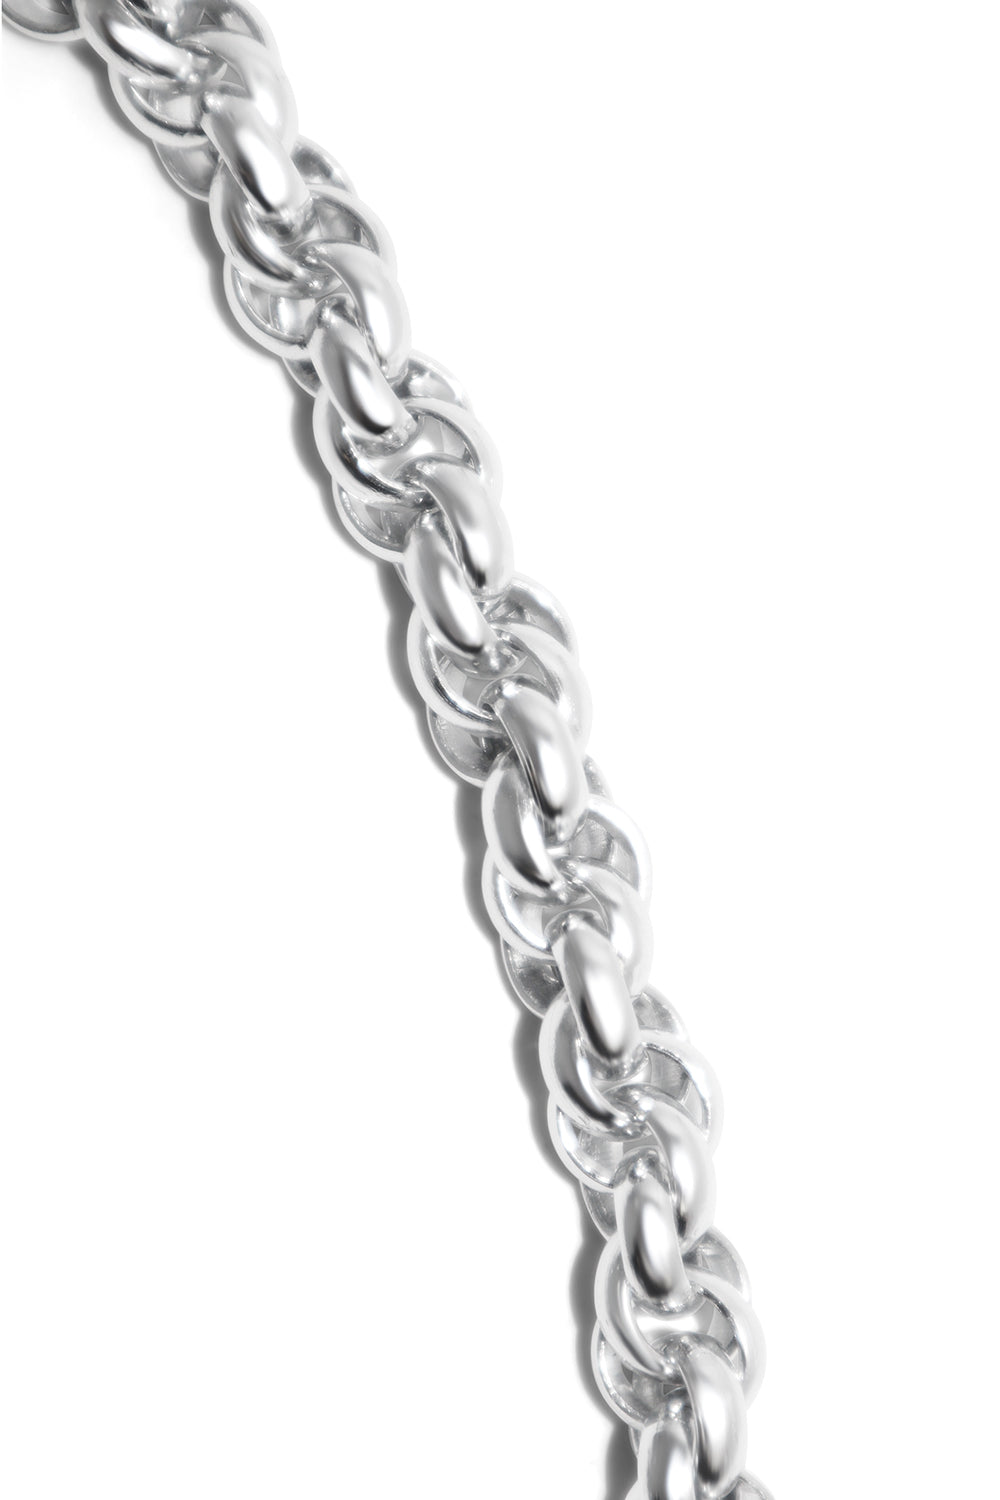 IK Two Braided Silver Chain close view